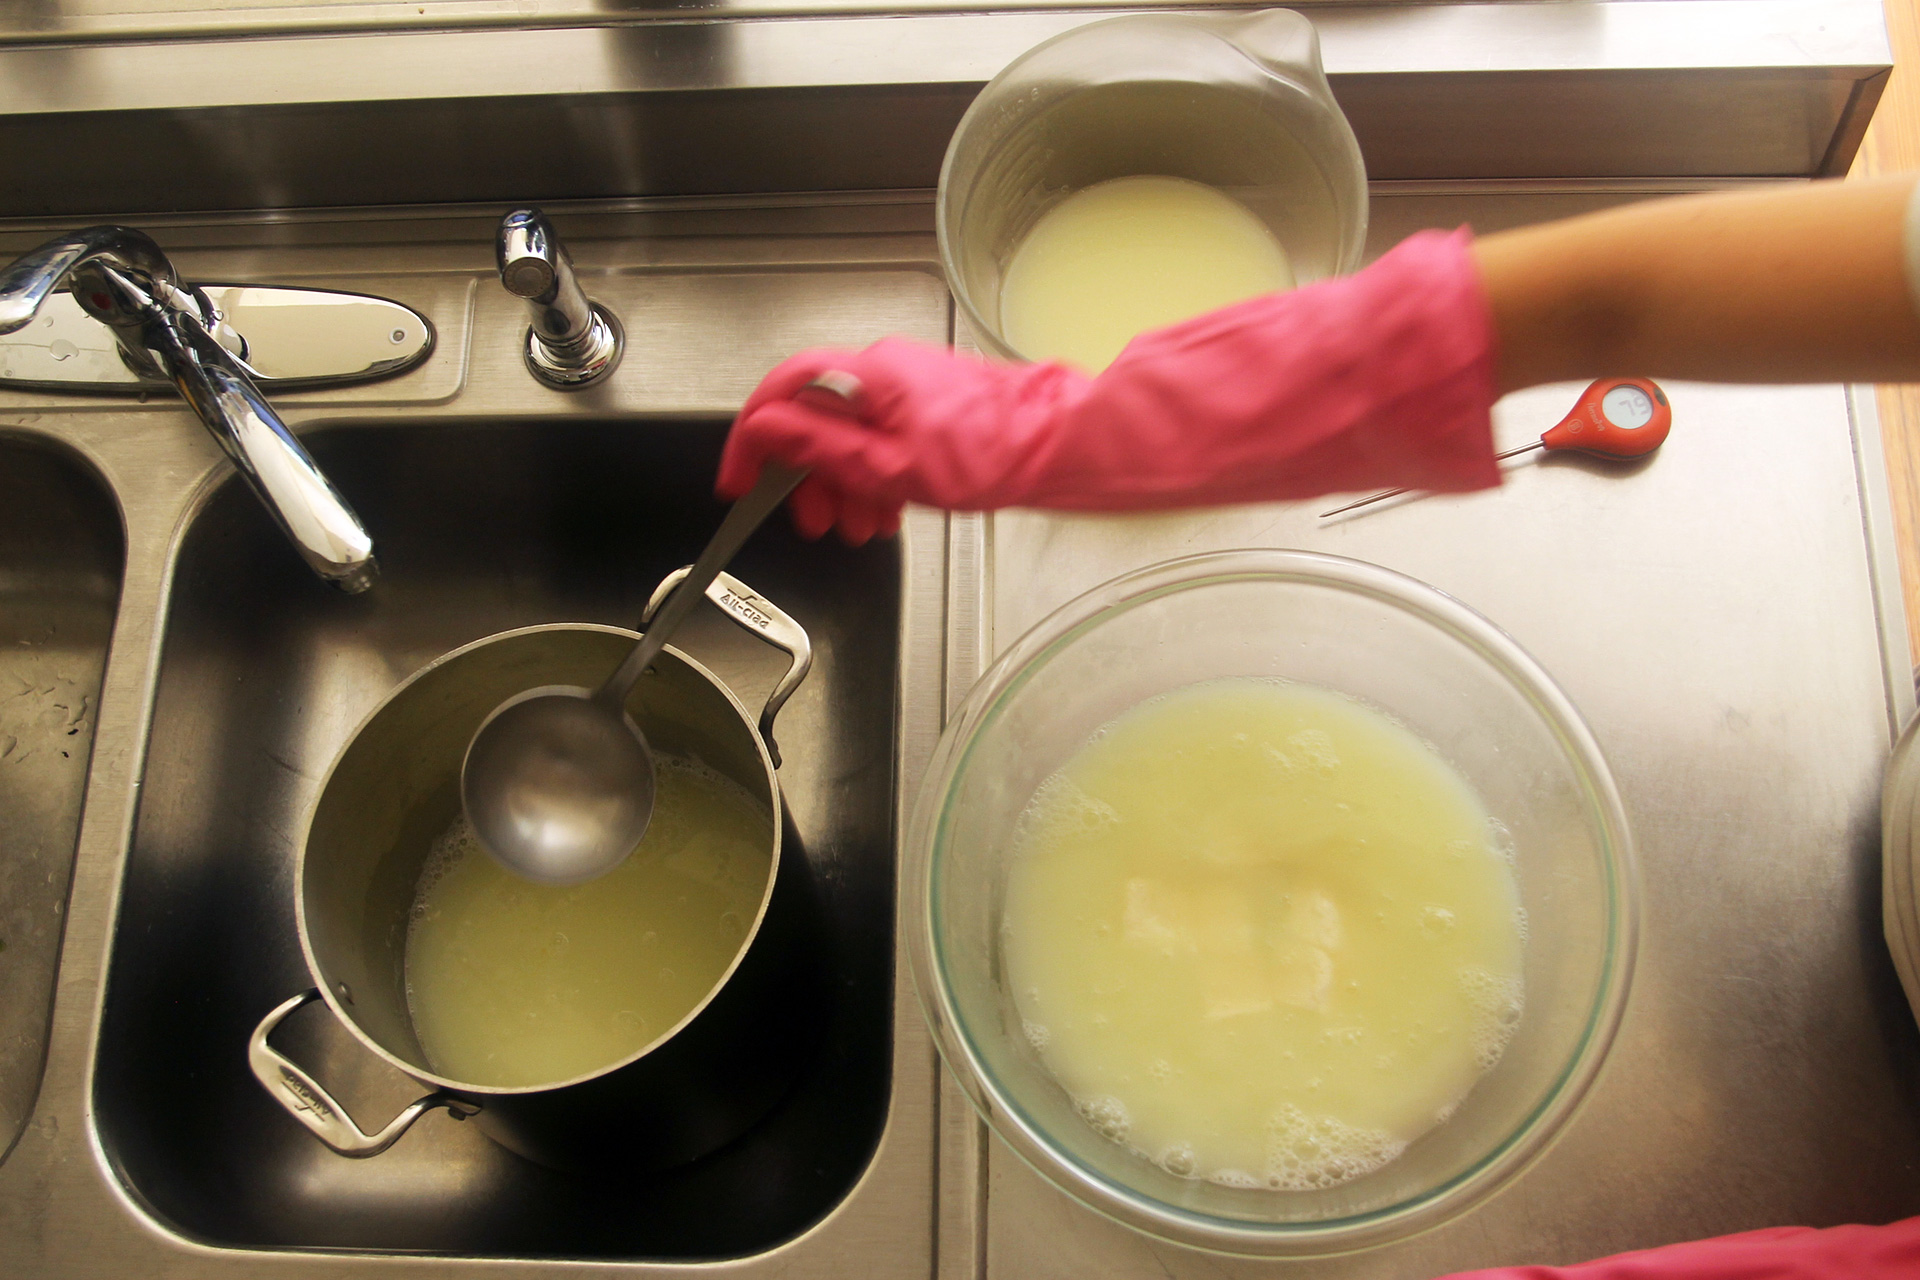 Clockwise, from left: Hot whey, room temperature whey, and mozzarella curds covered in hot whey.